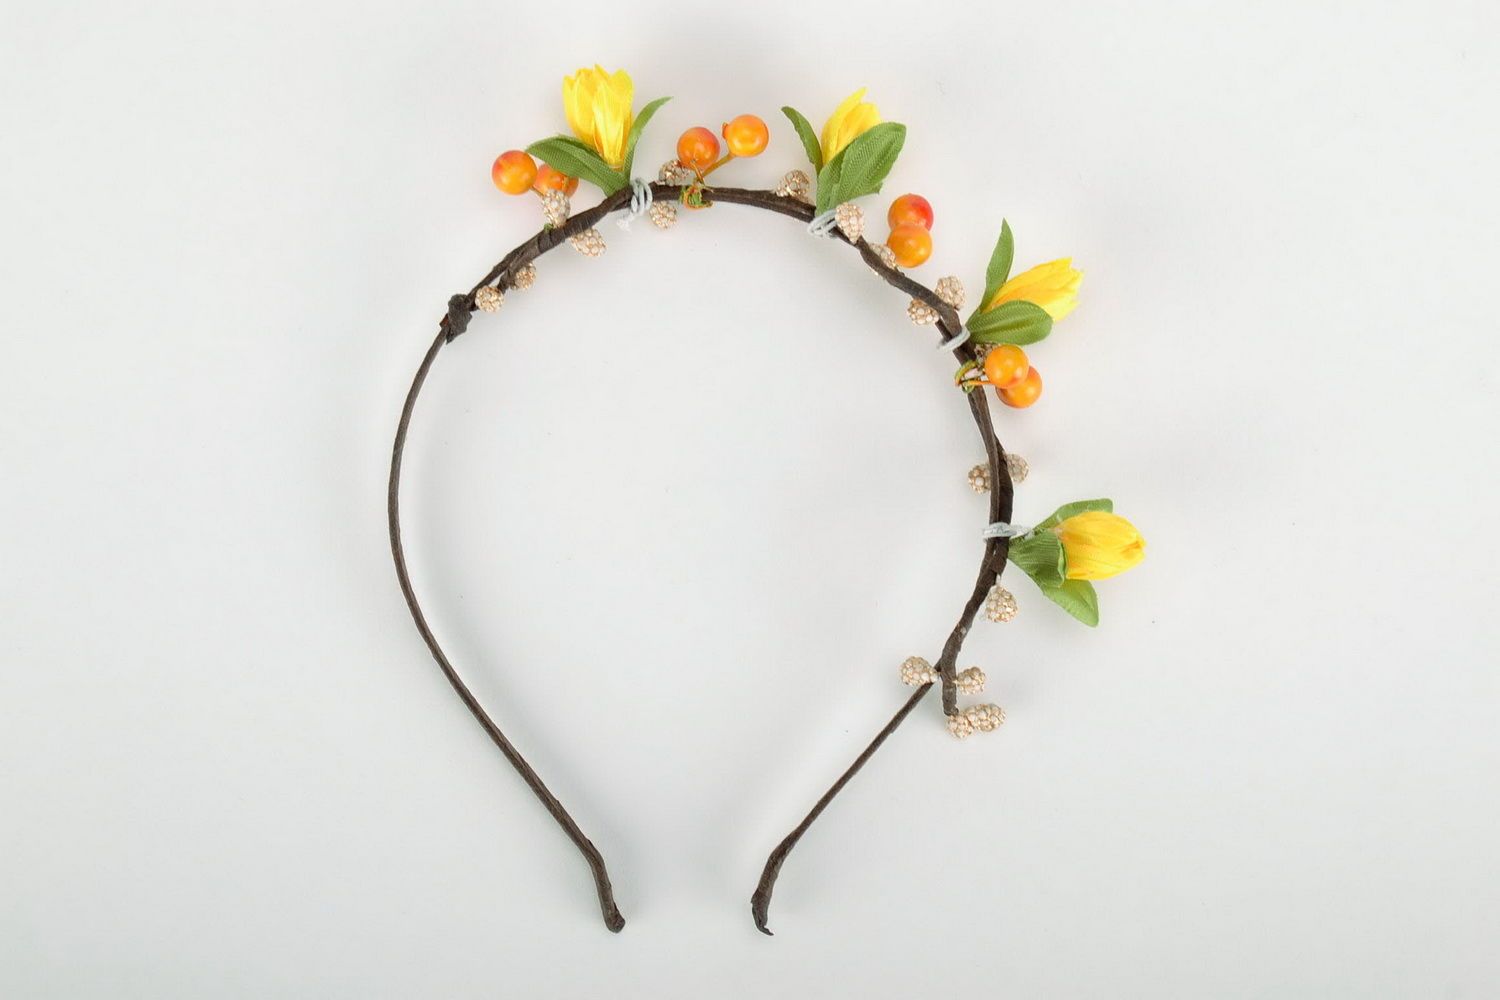 Headband made from flowers and berries photo 3